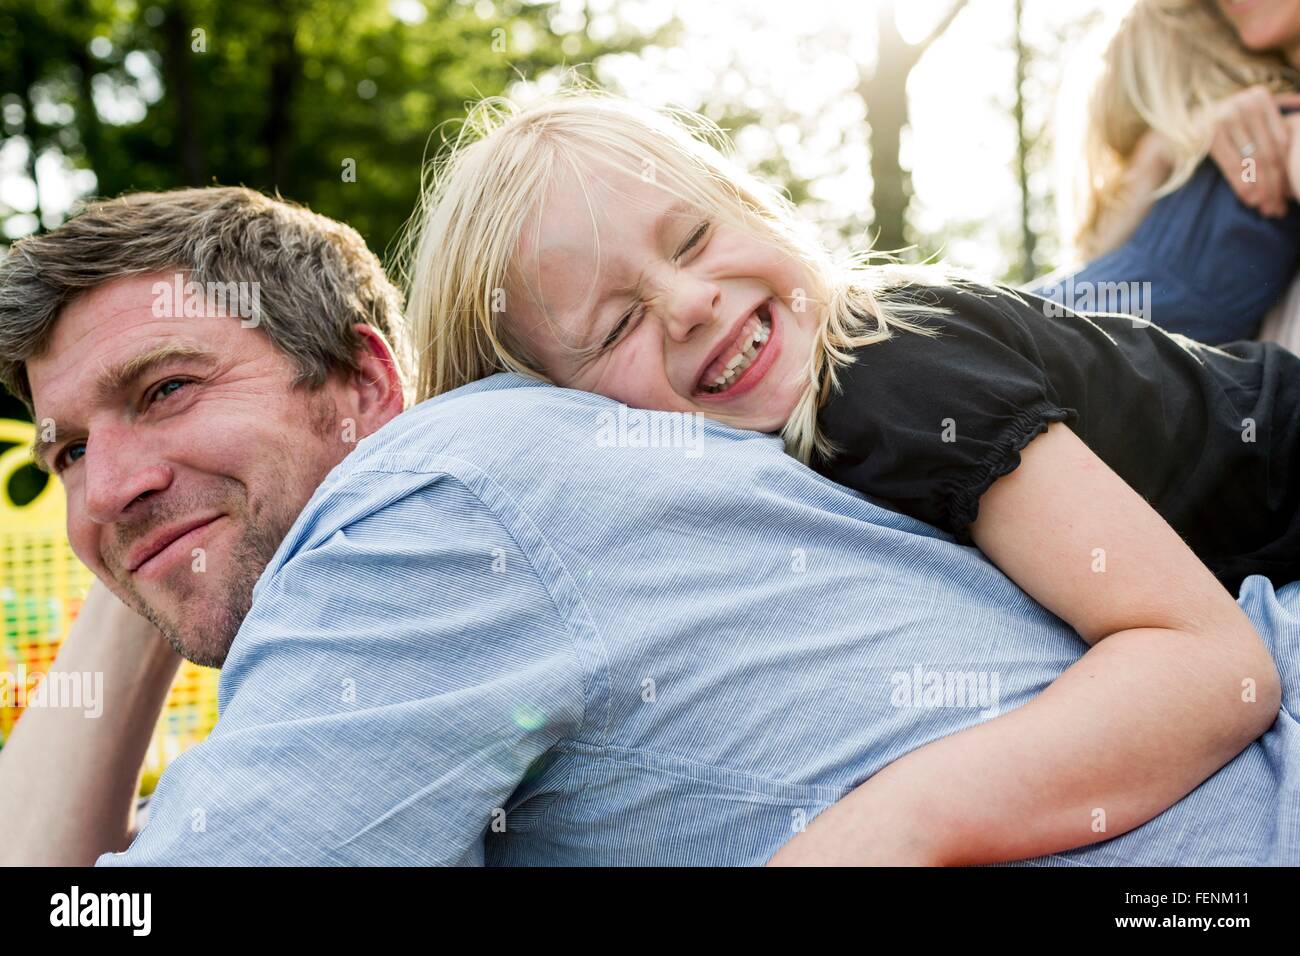 Girl hugging father in park Stock Photo